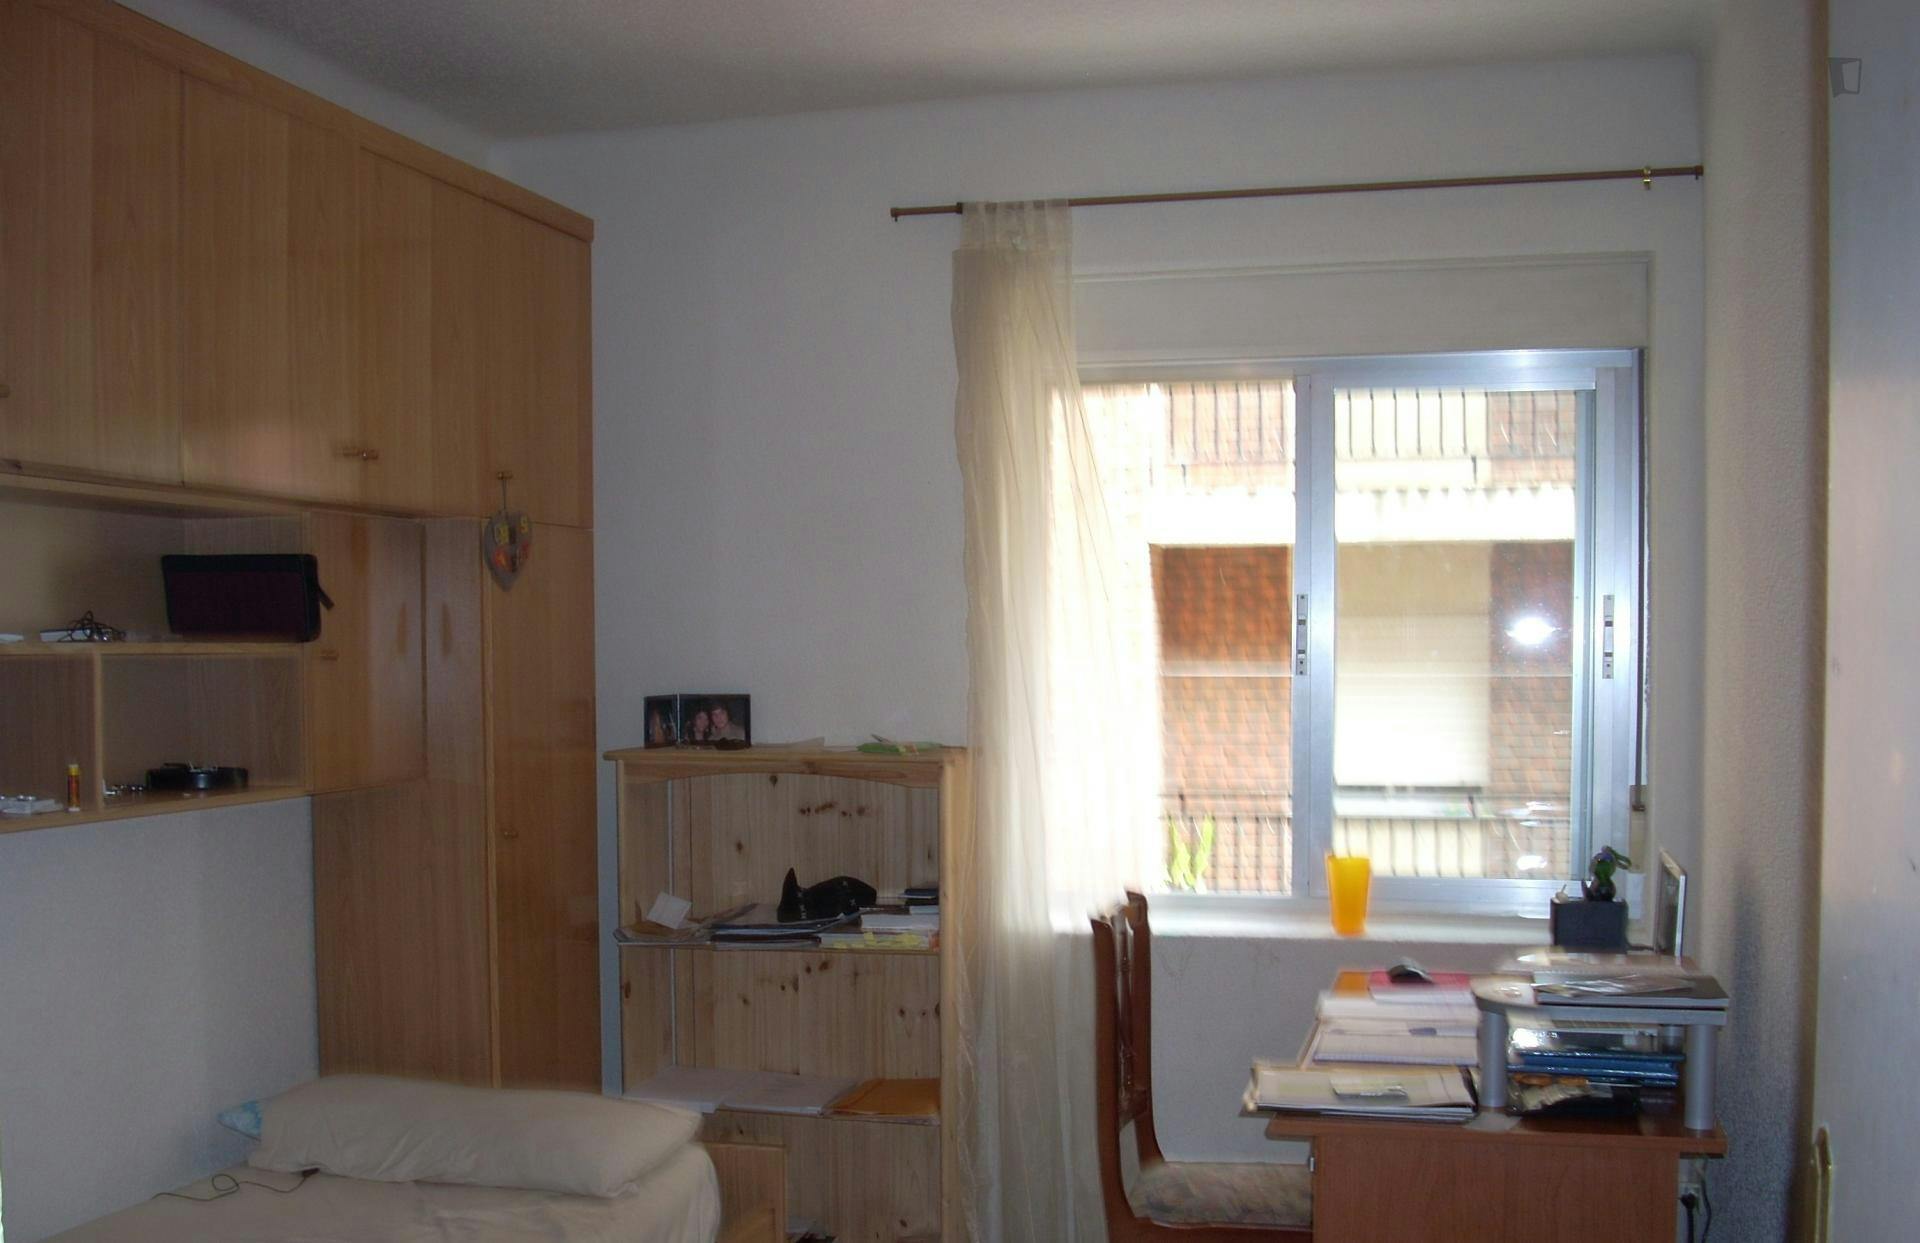 Fair and cosy single bedroom in a 3-bedroom flat, in the heart of Salamanca